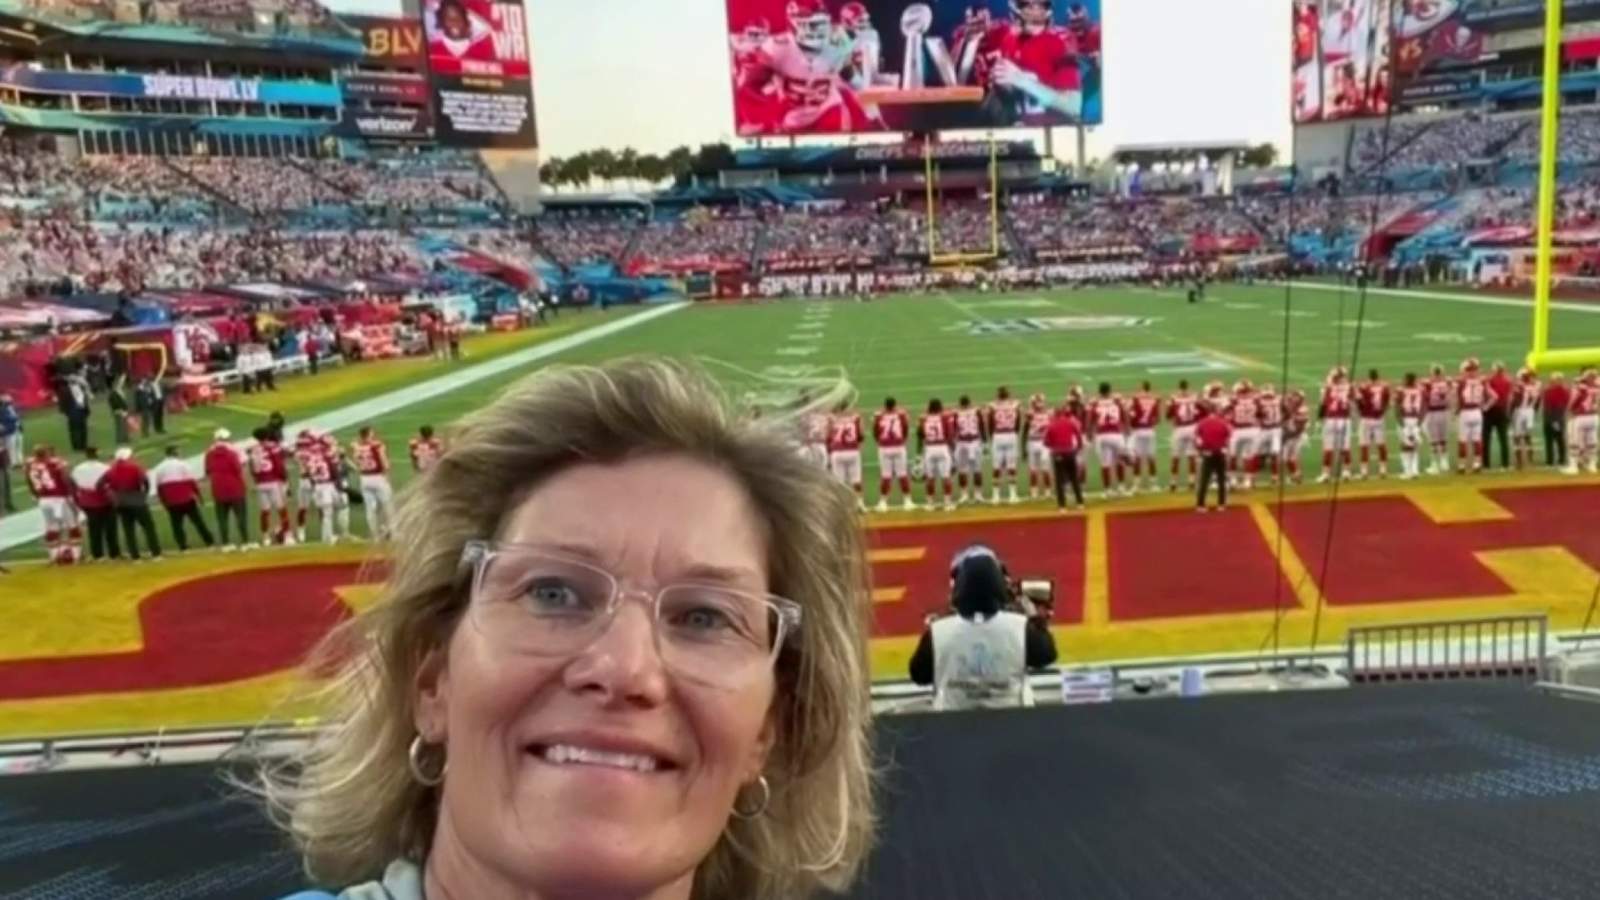 Local nurse invited by NFL Commissioner Roger Goodell to Super Bowl recounts her experience